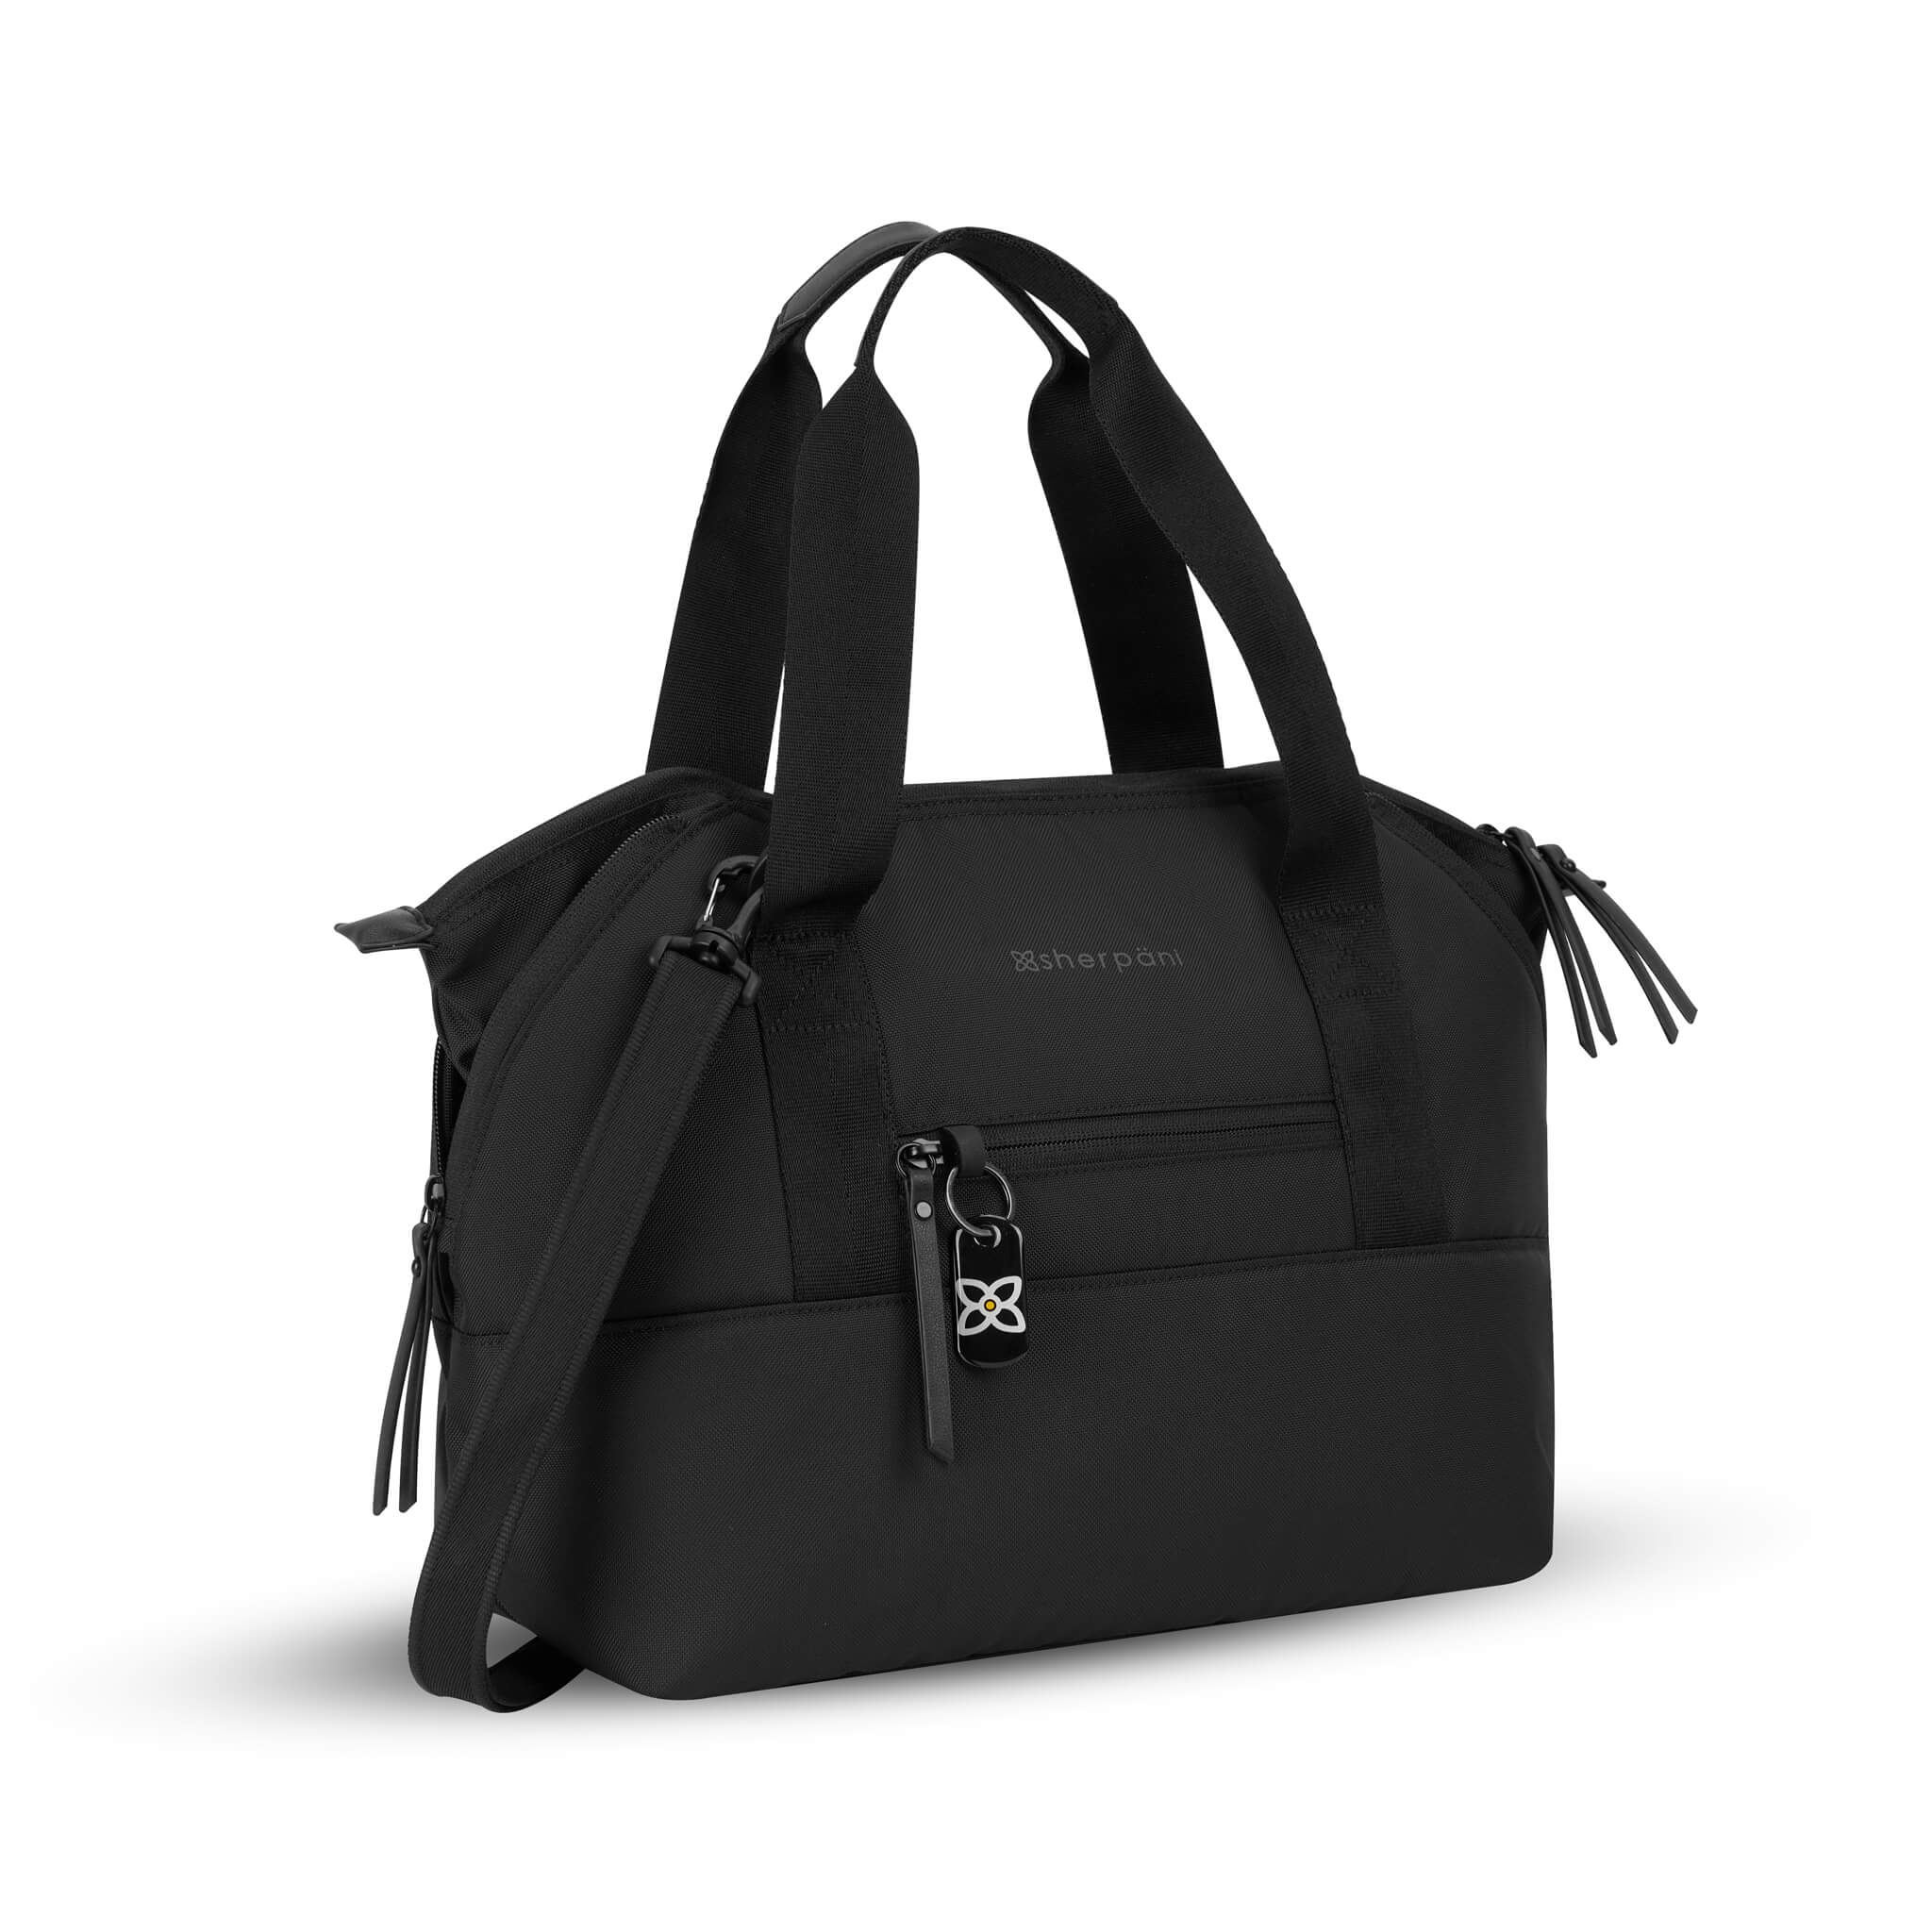 Front angled view of the Eclipse in Carbon (classic black). This travel tote features a zipper pocket in each corner which makes the Eclipse an expandable bag. This Anti-Theft purse is sustainably made from recycled materials including post consumer plastic and vegan leather. 